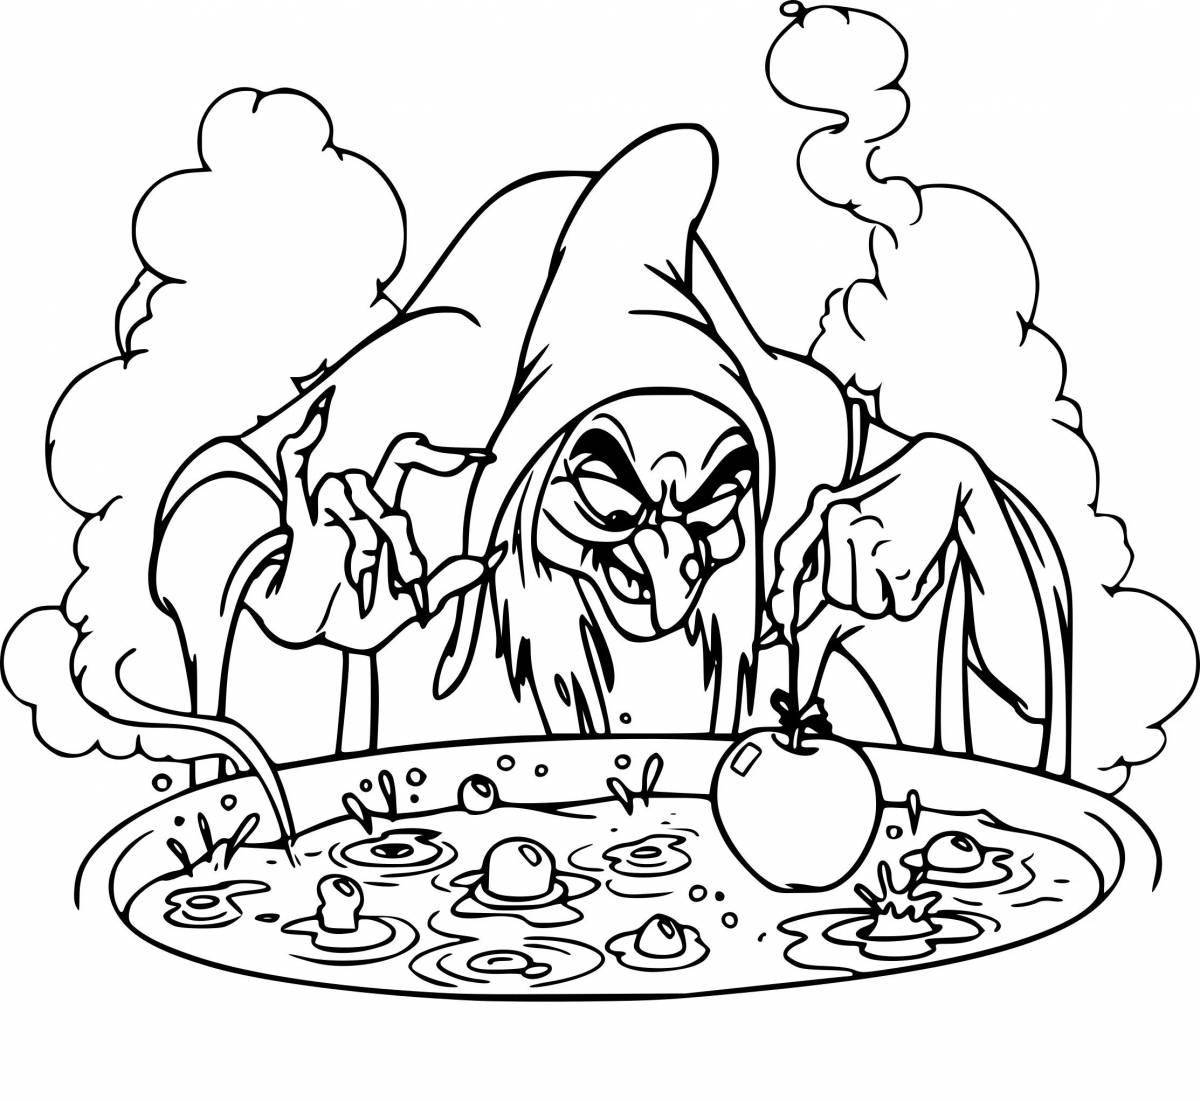 Fantastic witch coloring book